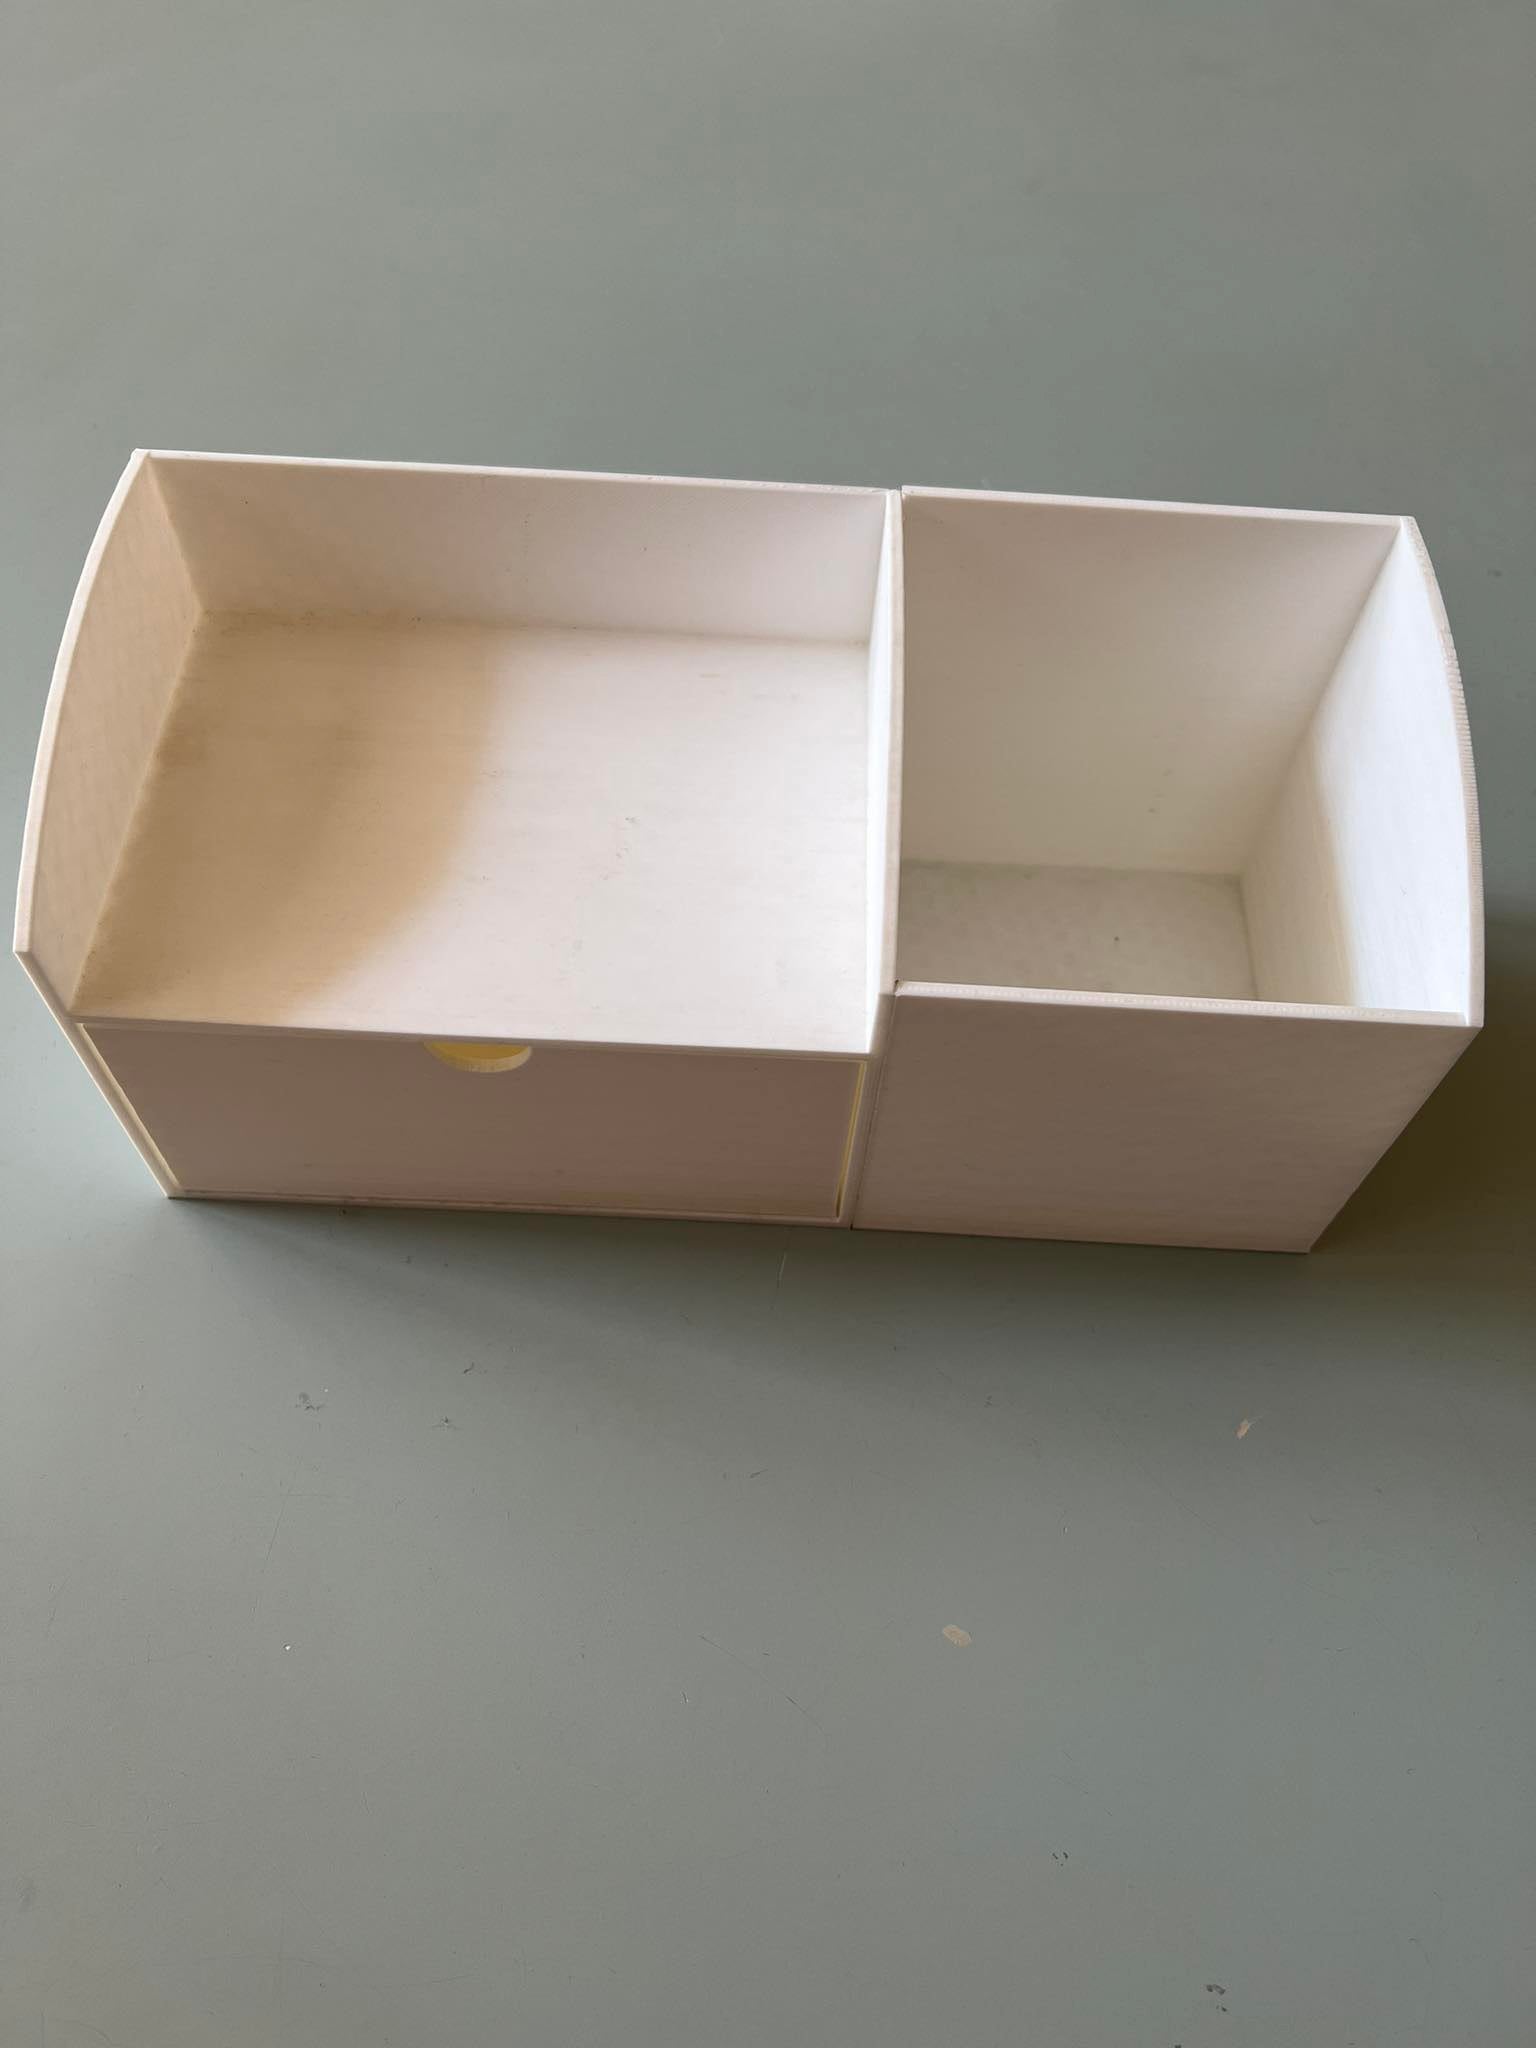 Bathroom organiser for drawers and products